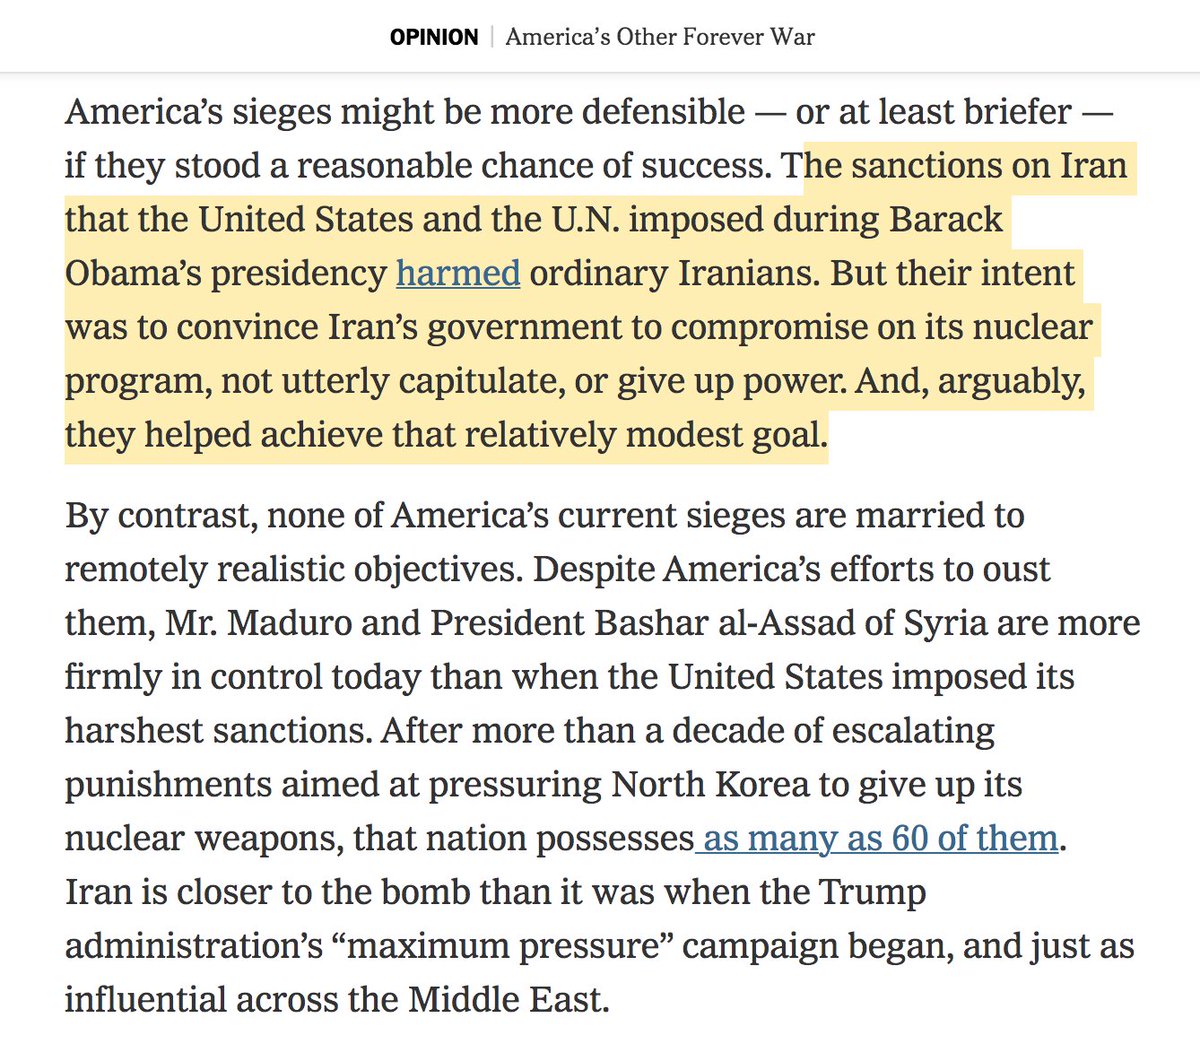 5/ BTW,  @PeterBeinart falsely suggests the sanctions policy "helped achieve" goals in Iran. But as  @TritaParsi wrote in “Losing An Enemy”, Iran’s nuclear program developed faster than Obama could destroy Iran’s economy. "Sanctions never stopped their program," Wendy Sherman said.